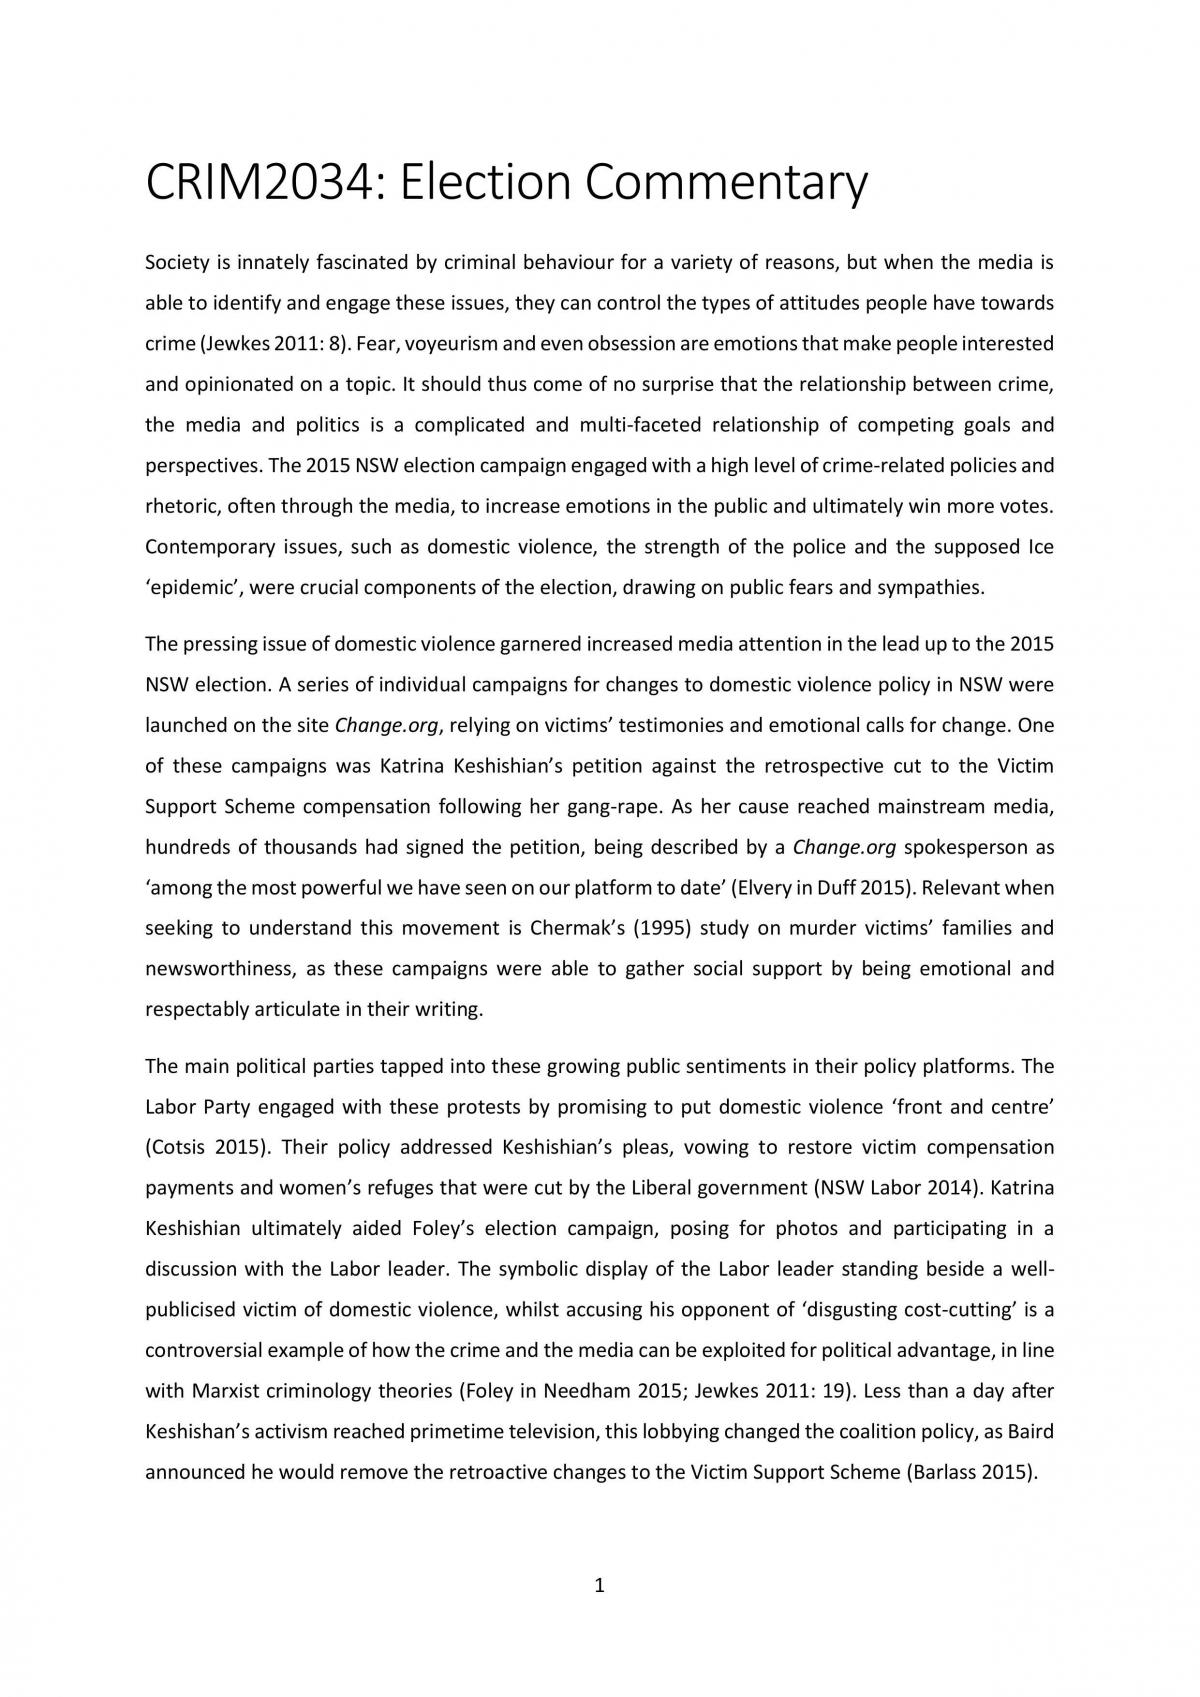 CRIM2034 Election Commentary Essay - Page 1